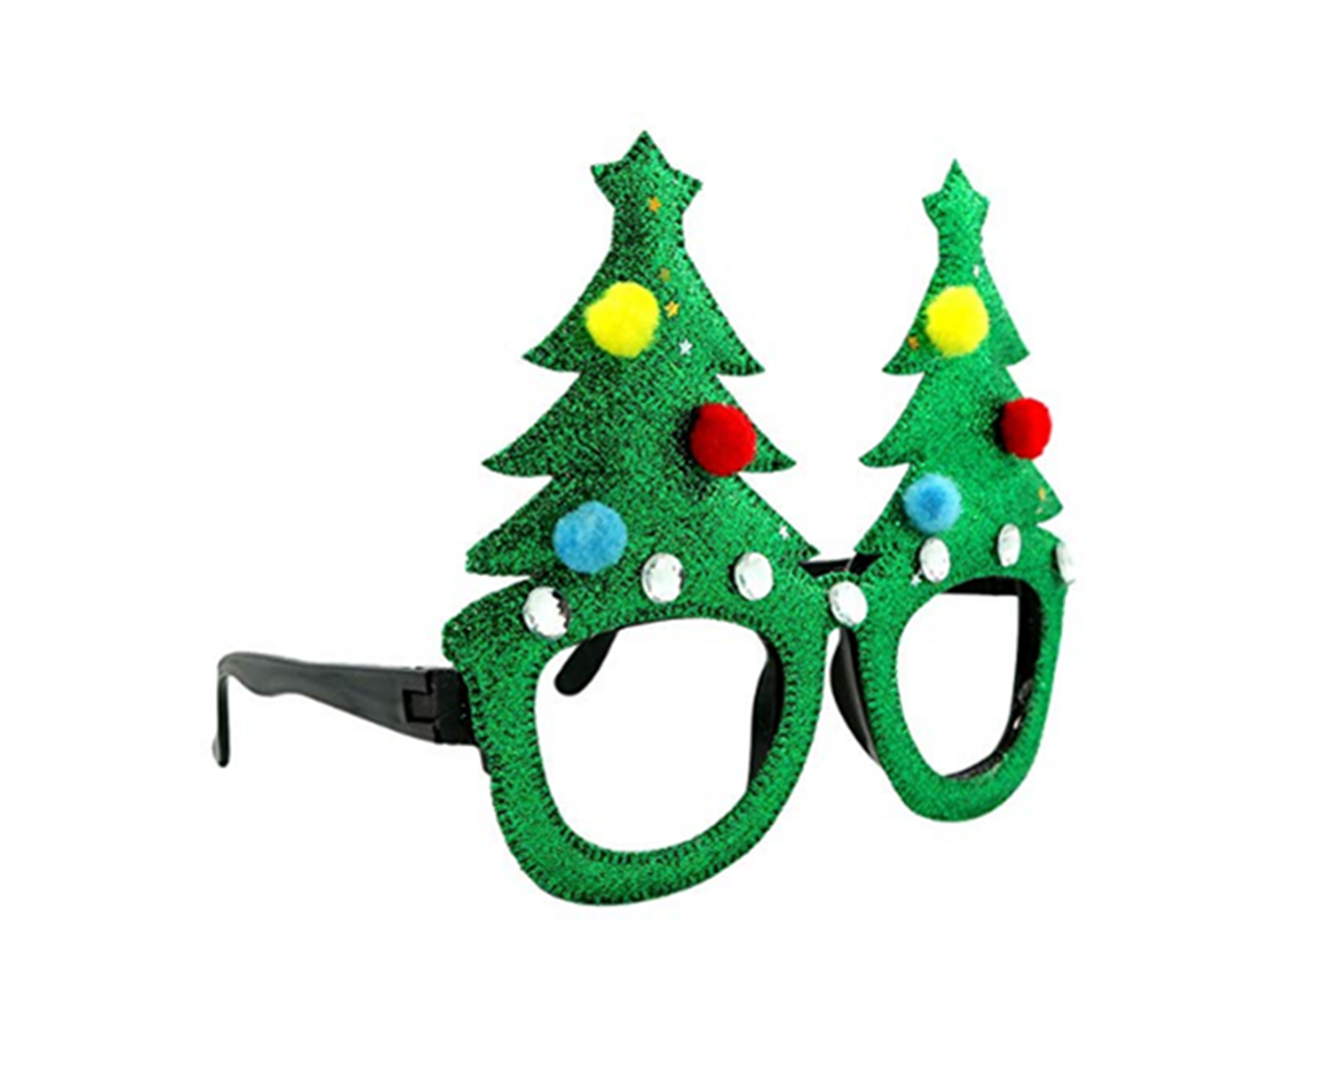 Christmas Ornaments Glasses Frames Evening Party Toy Xmas Gifts Decoration Without Lenses - 1